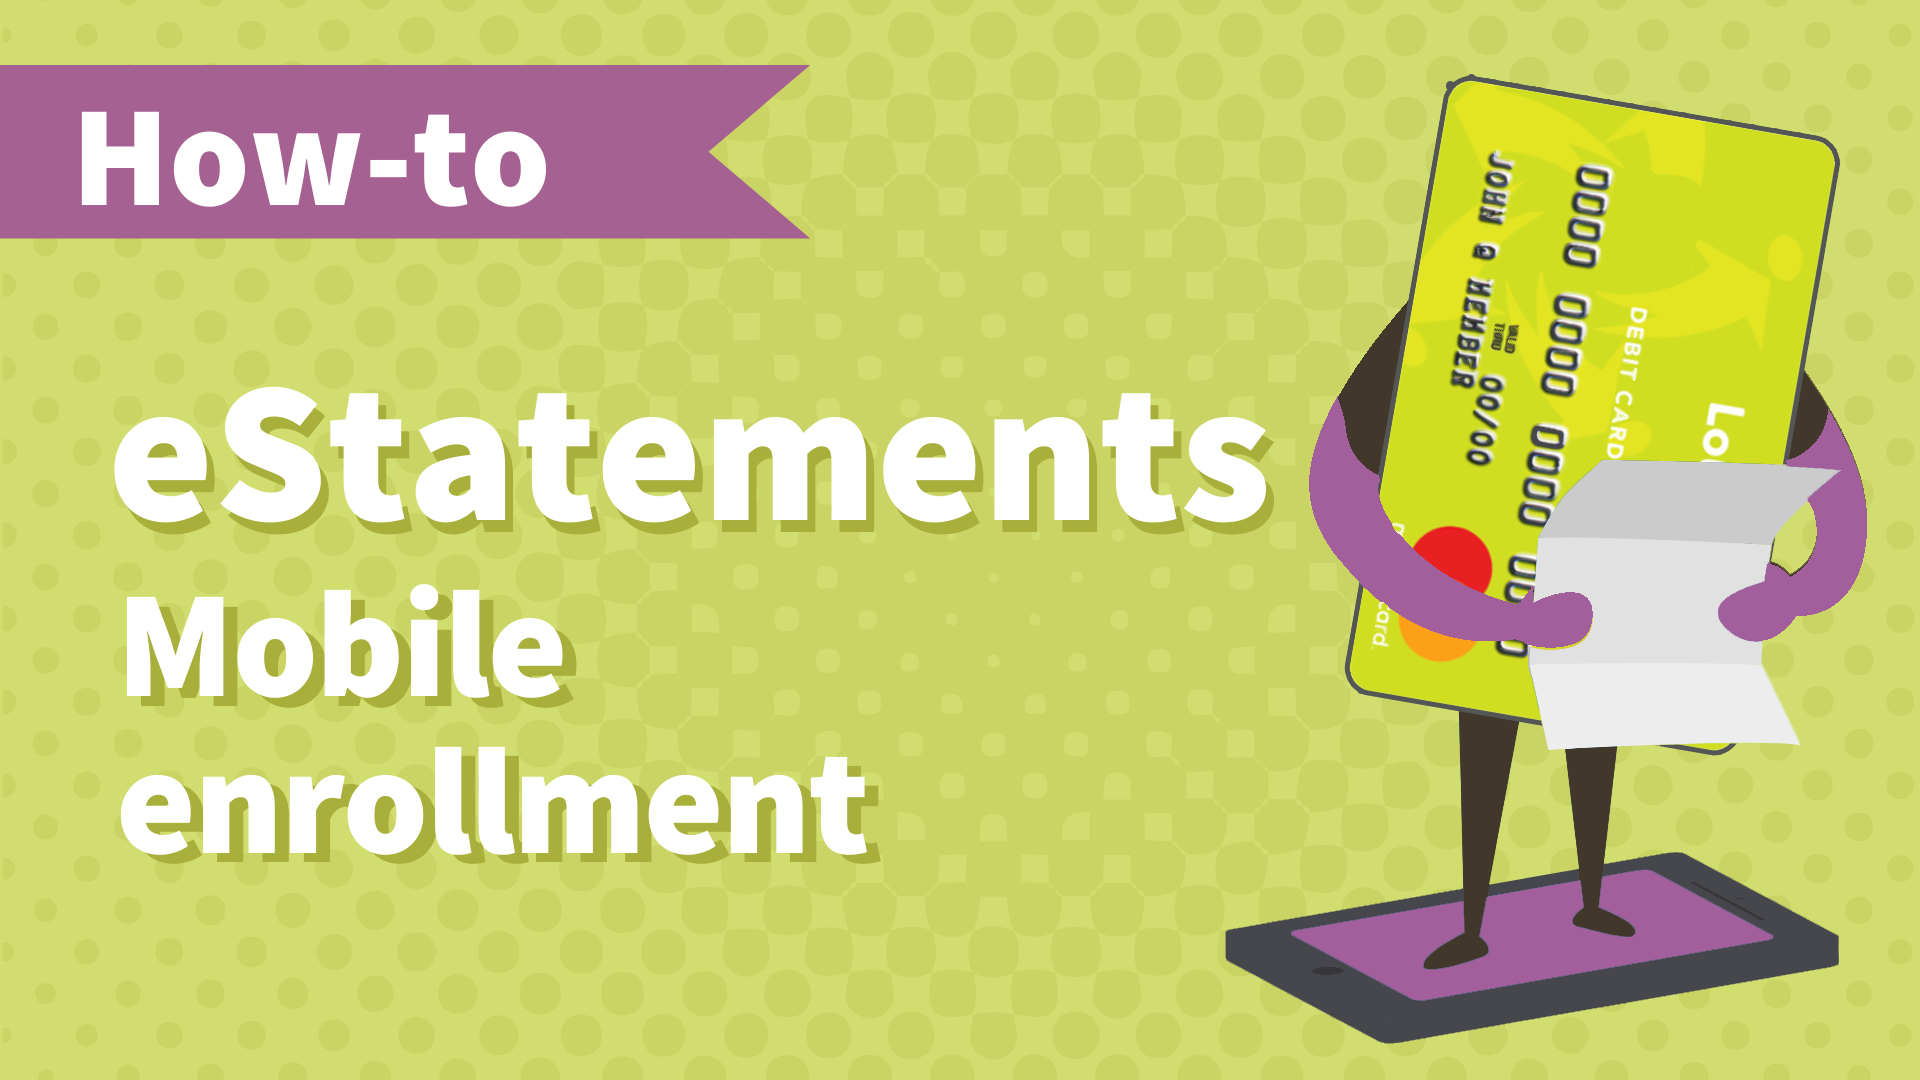 How to do it - Enroll in eStatements